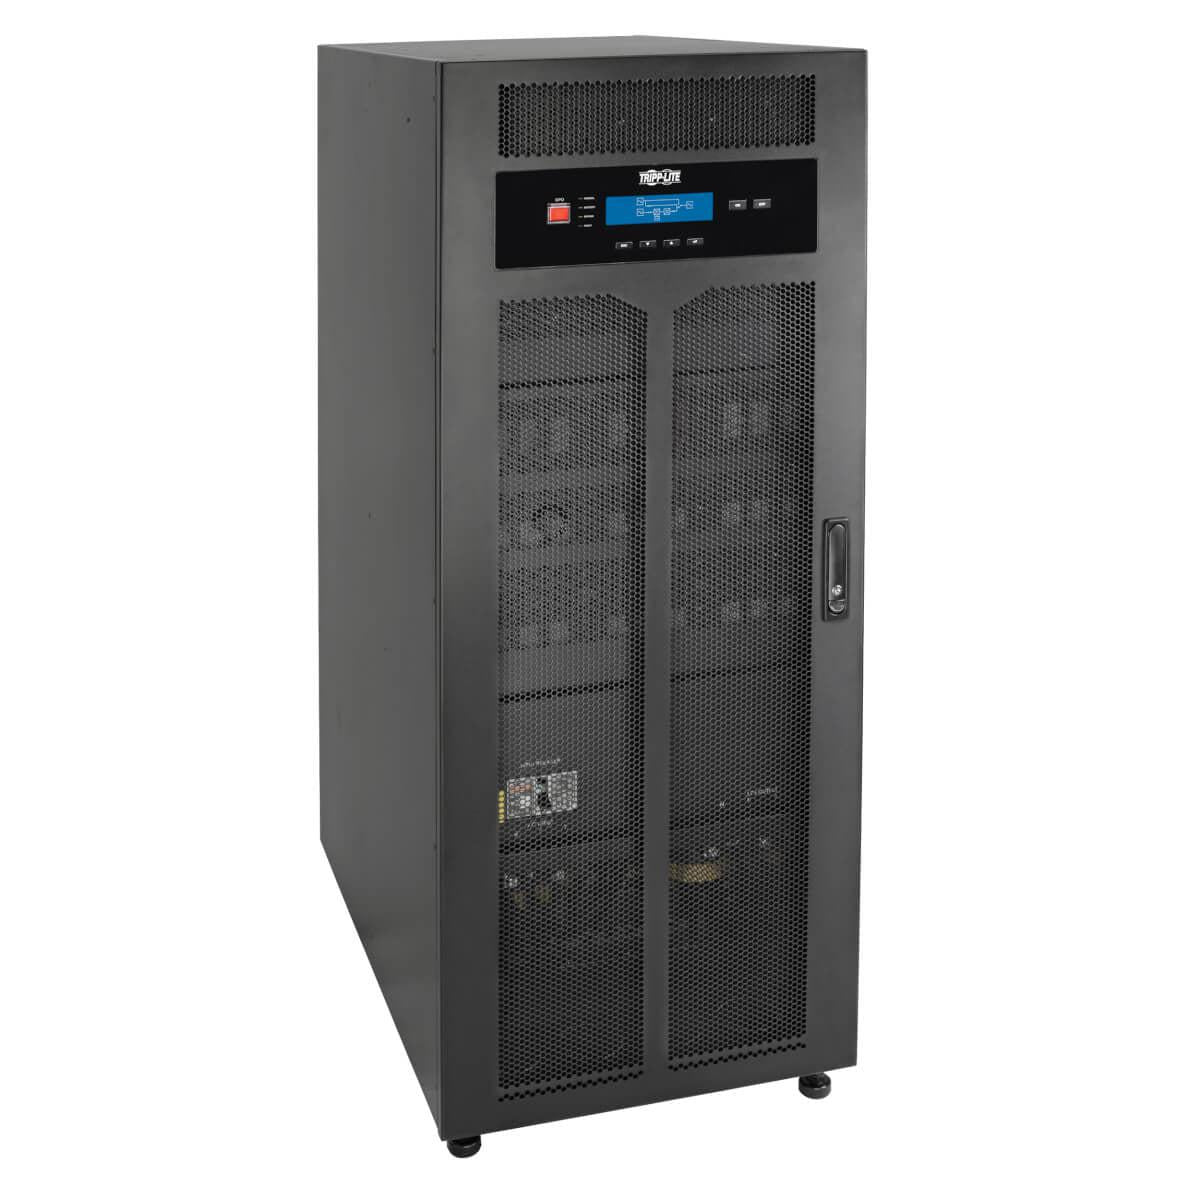 Tripp Lite Smartonline Sut Series 3-Phase 208/120V 220/127V 20Kva 20Kw On-Line Double-Conversion Ups, Tower, Extended Run, Snmp Option